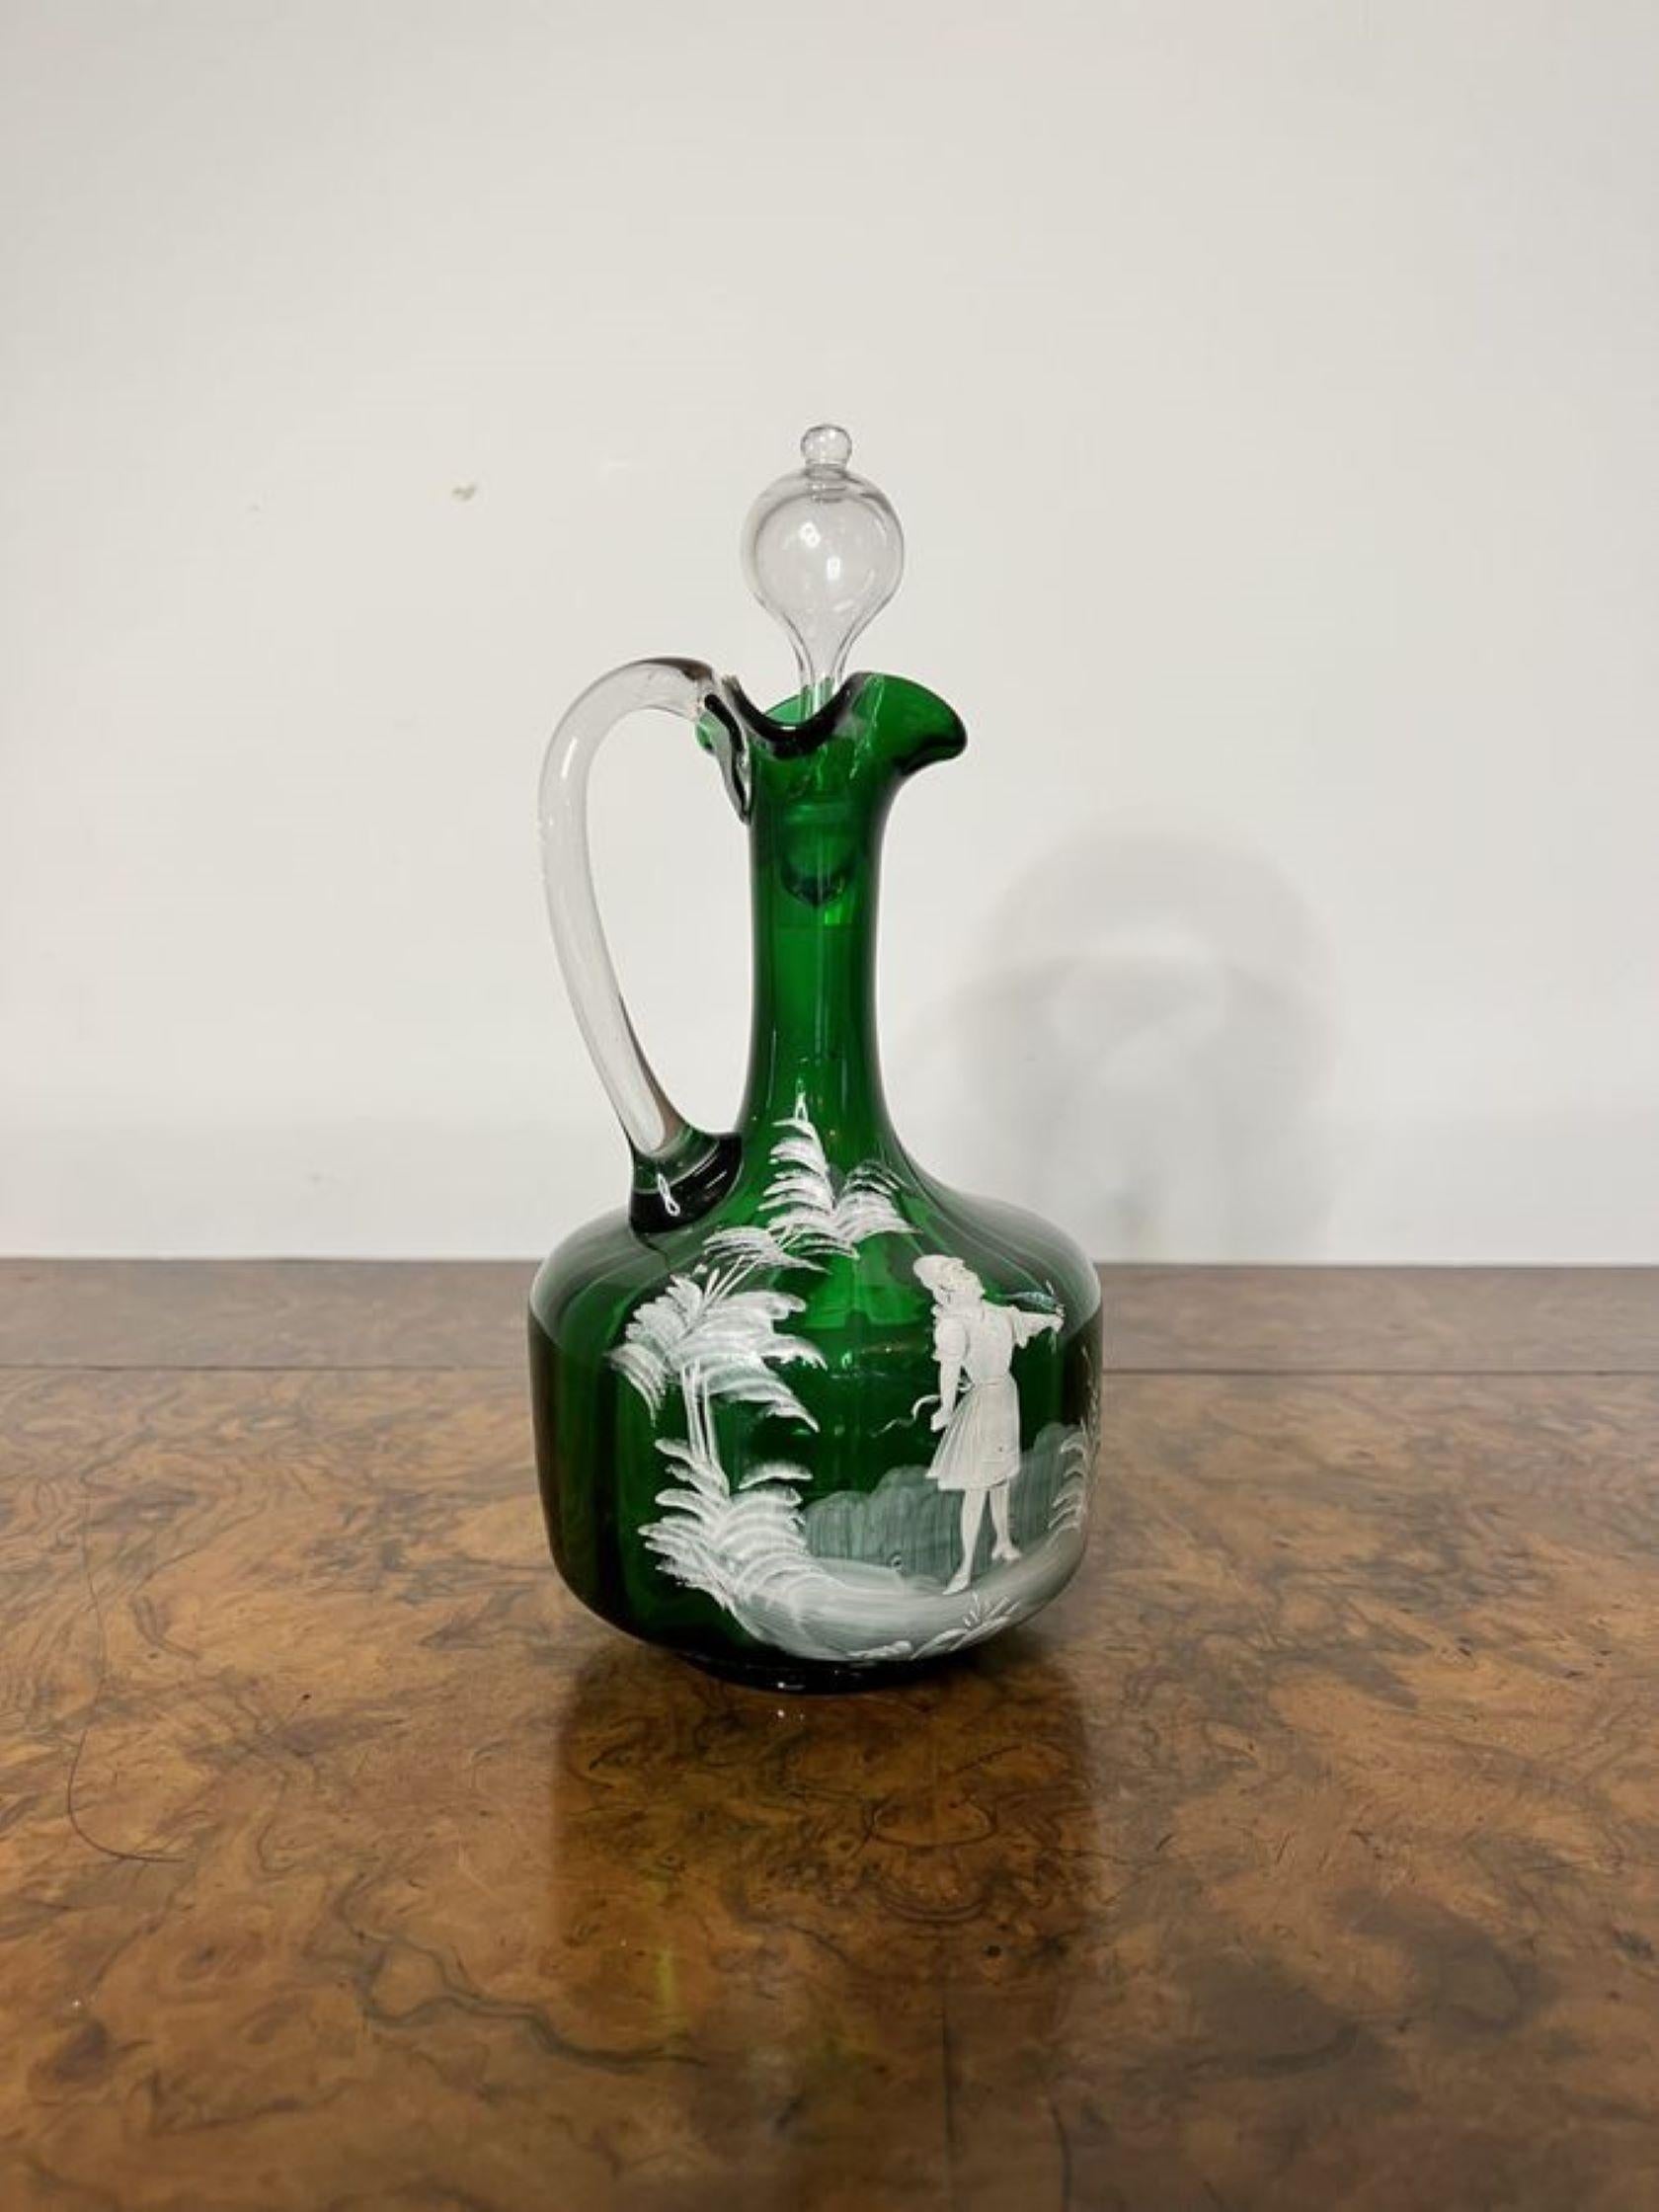 Stunning quality antique Victorian Mary Gregory green glass ewer having a stunning quality Mary Gregory green glass ewer with white enamel decoration of a girl surrounded by trees having a shaped handle to the back and a wavy top with the original